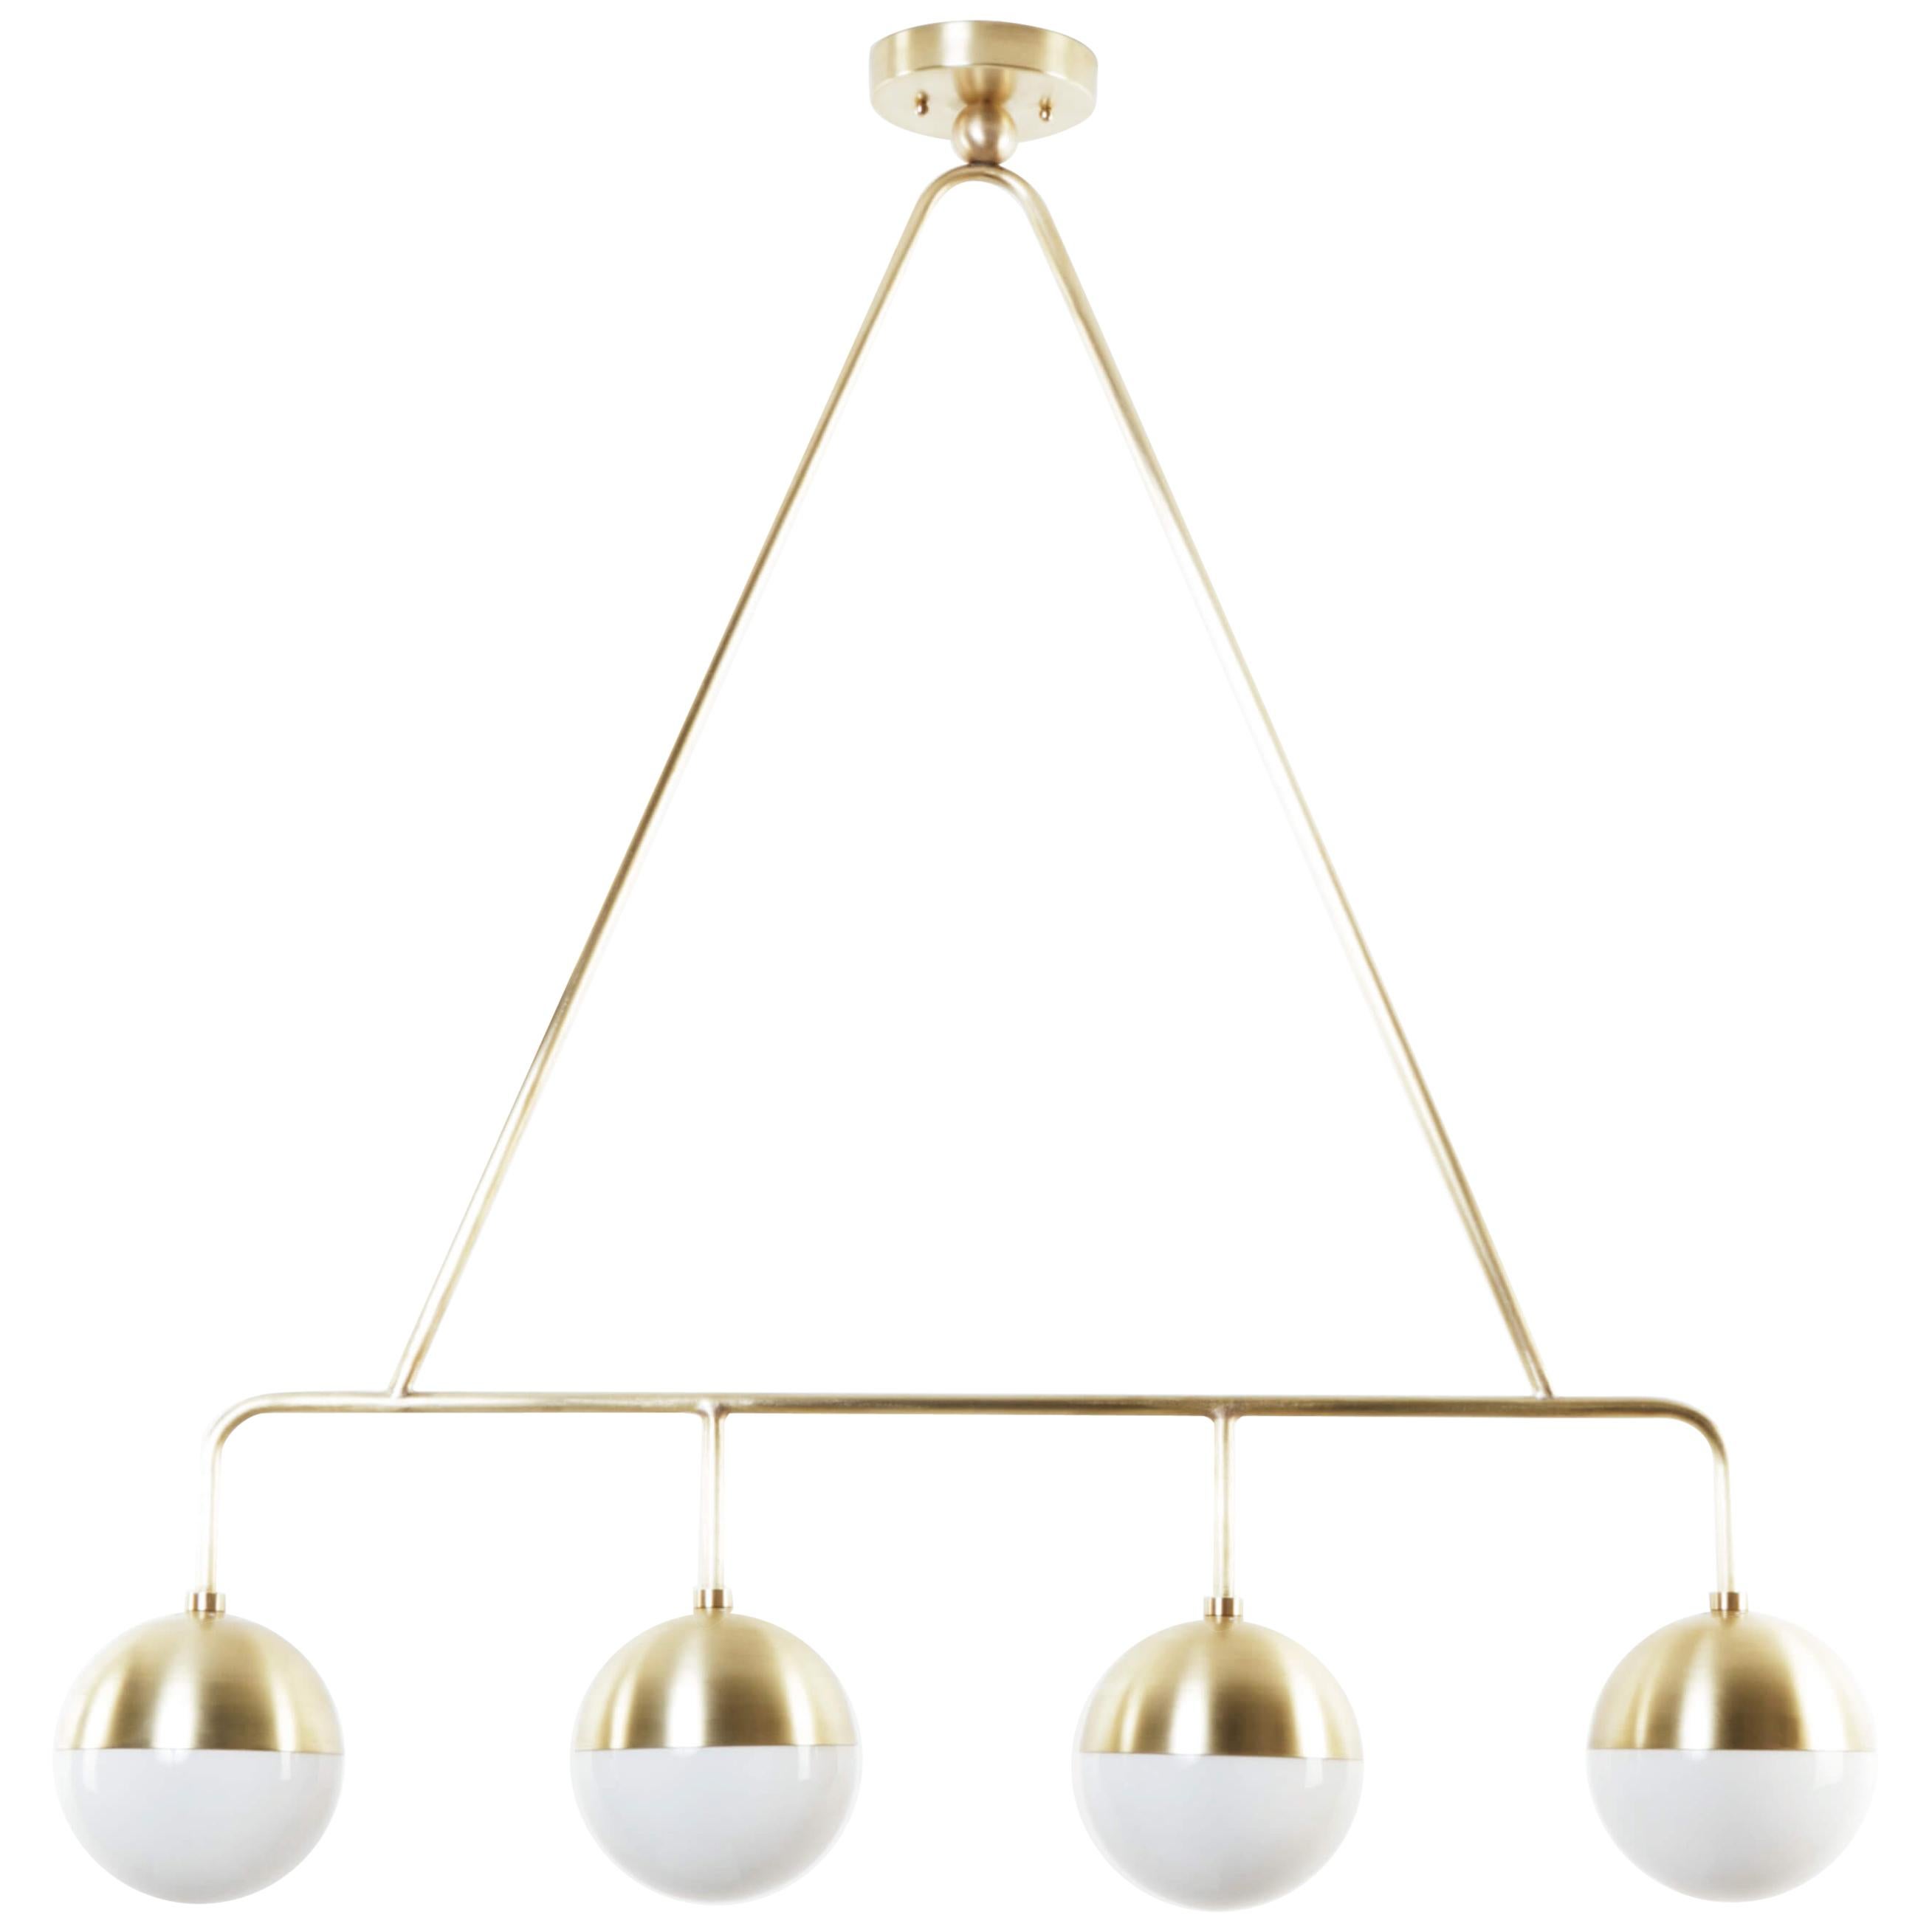 Balise Pendant Light in Brass with 4 Opal Glass Globes For Sale